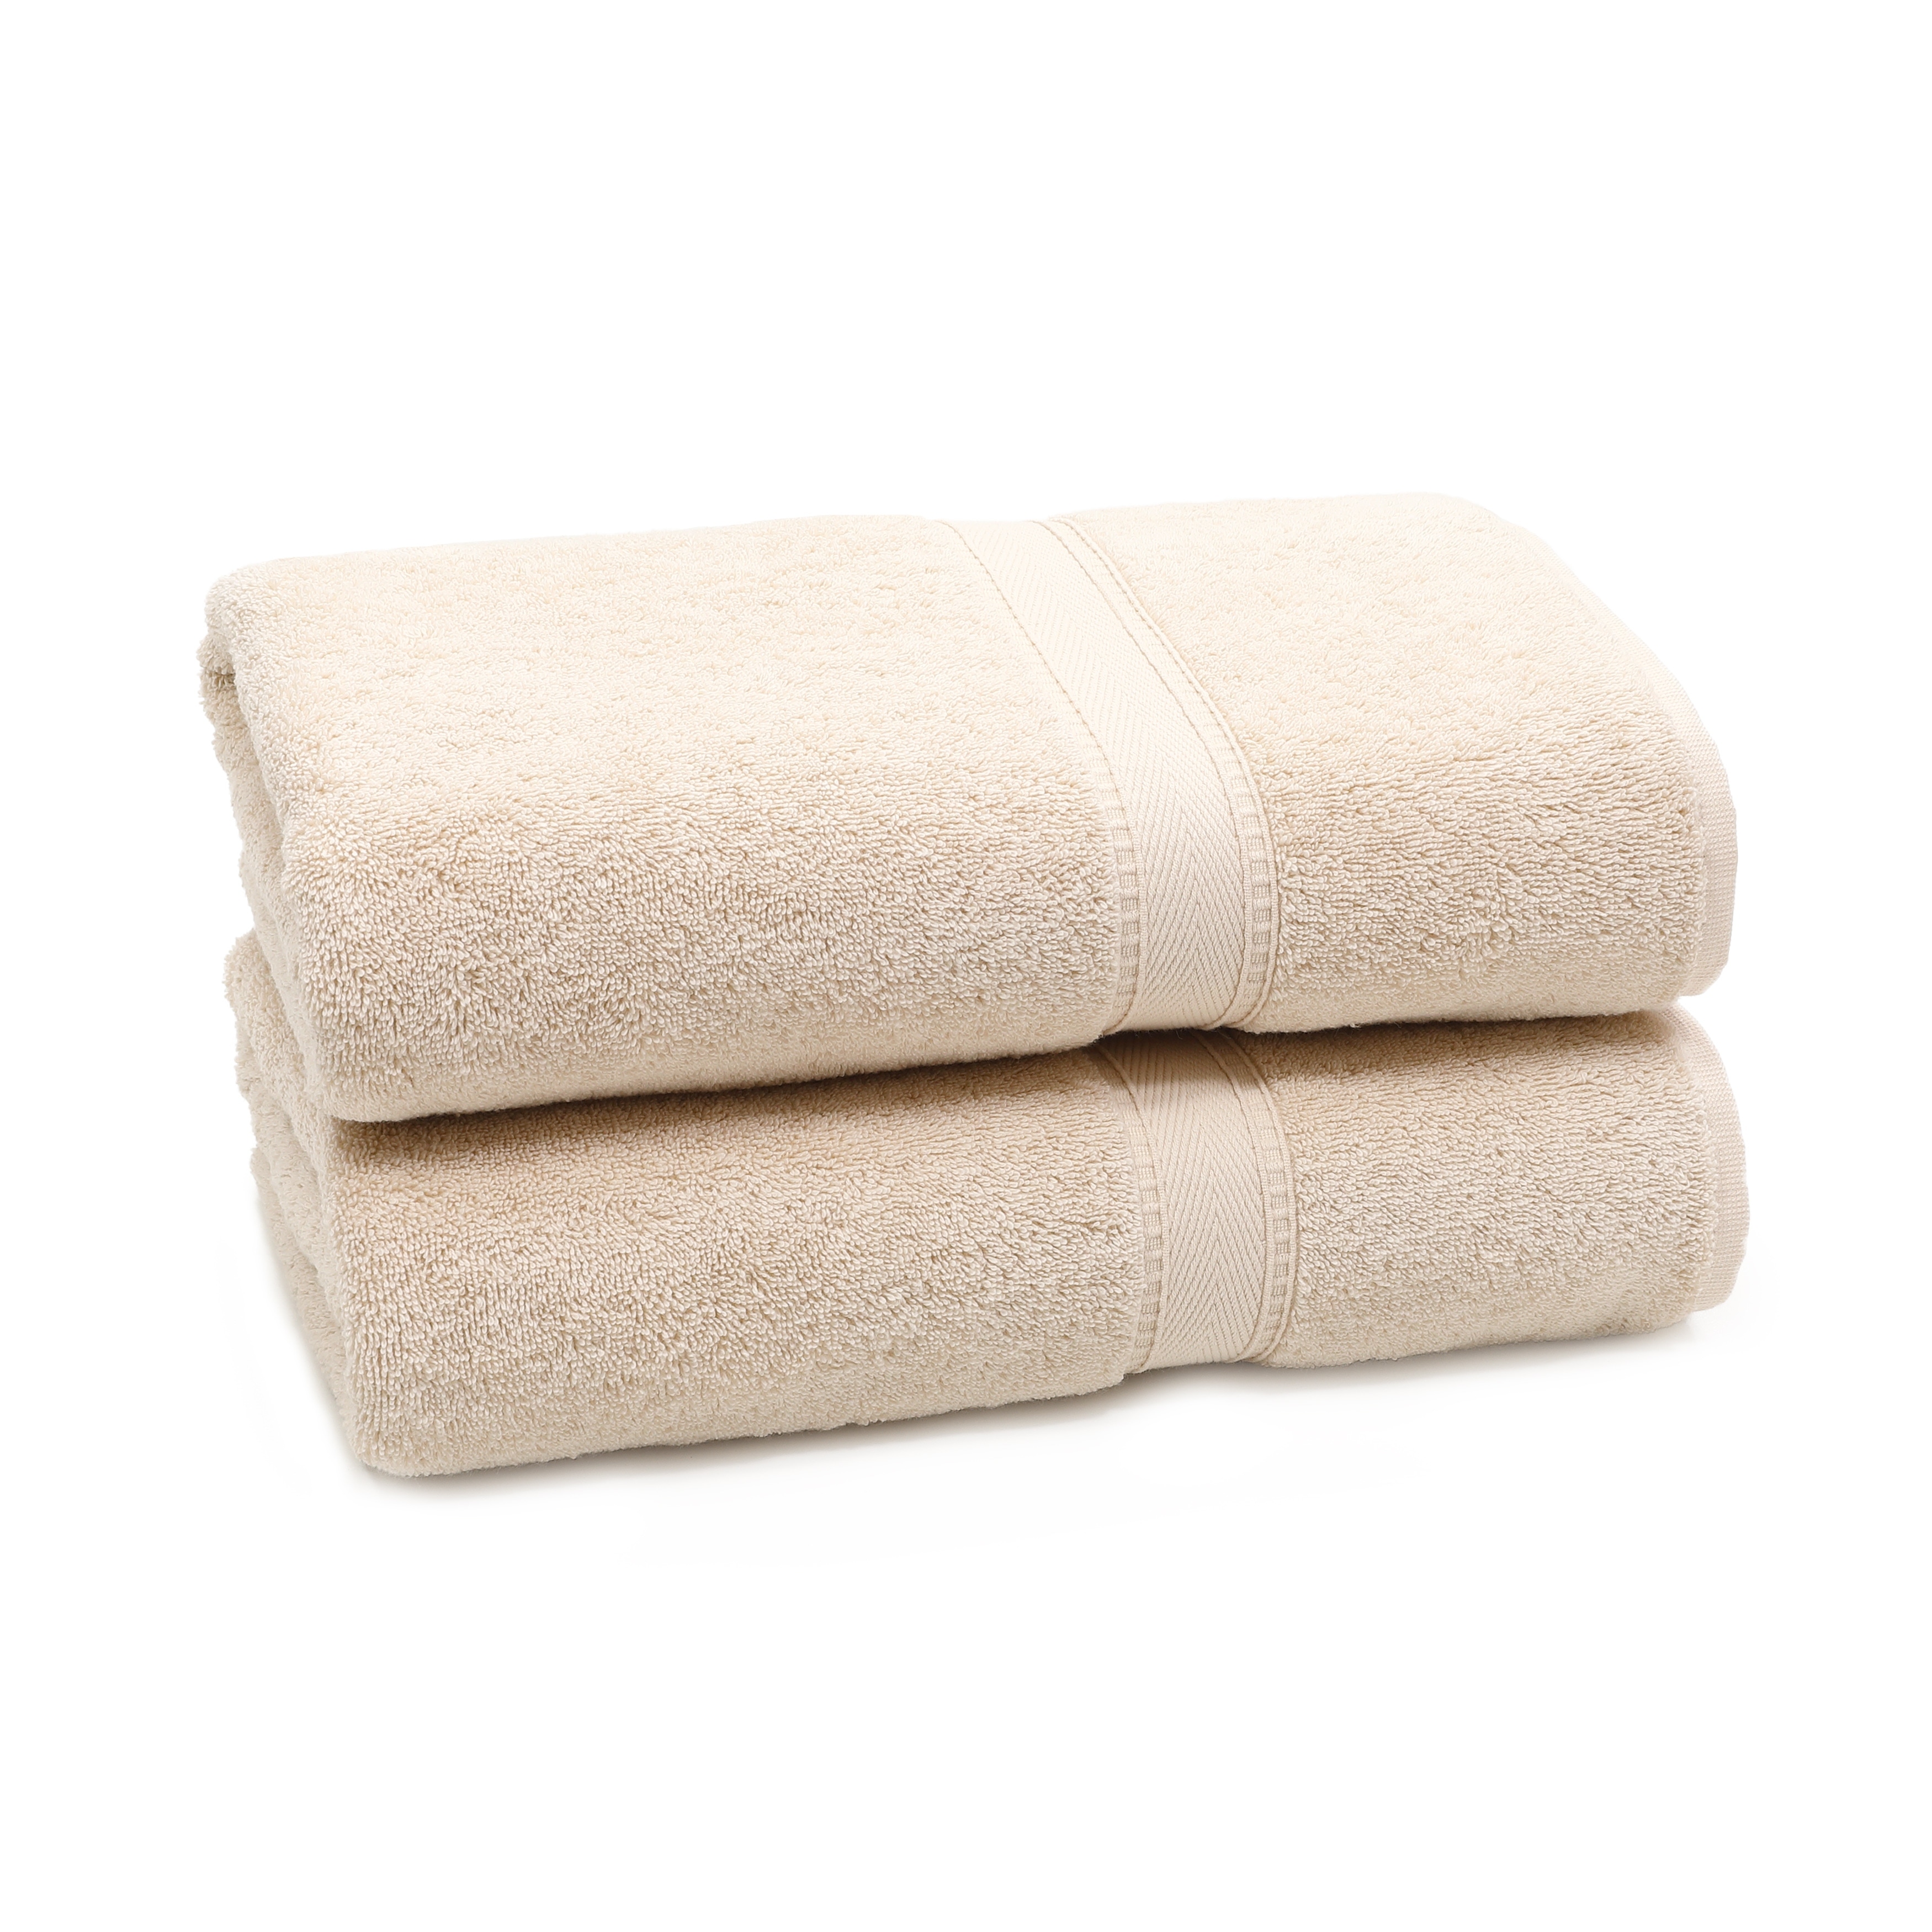 https://ak1.ostkcdn.com/images/products/is/images/direct/2e84a42a732798f17e9cf9d3365b4677fb41c633/Authentic-Hotel-and-Spa-Turkish-Cotton-Bath-Towels-%28Set-of-2%29.jpg